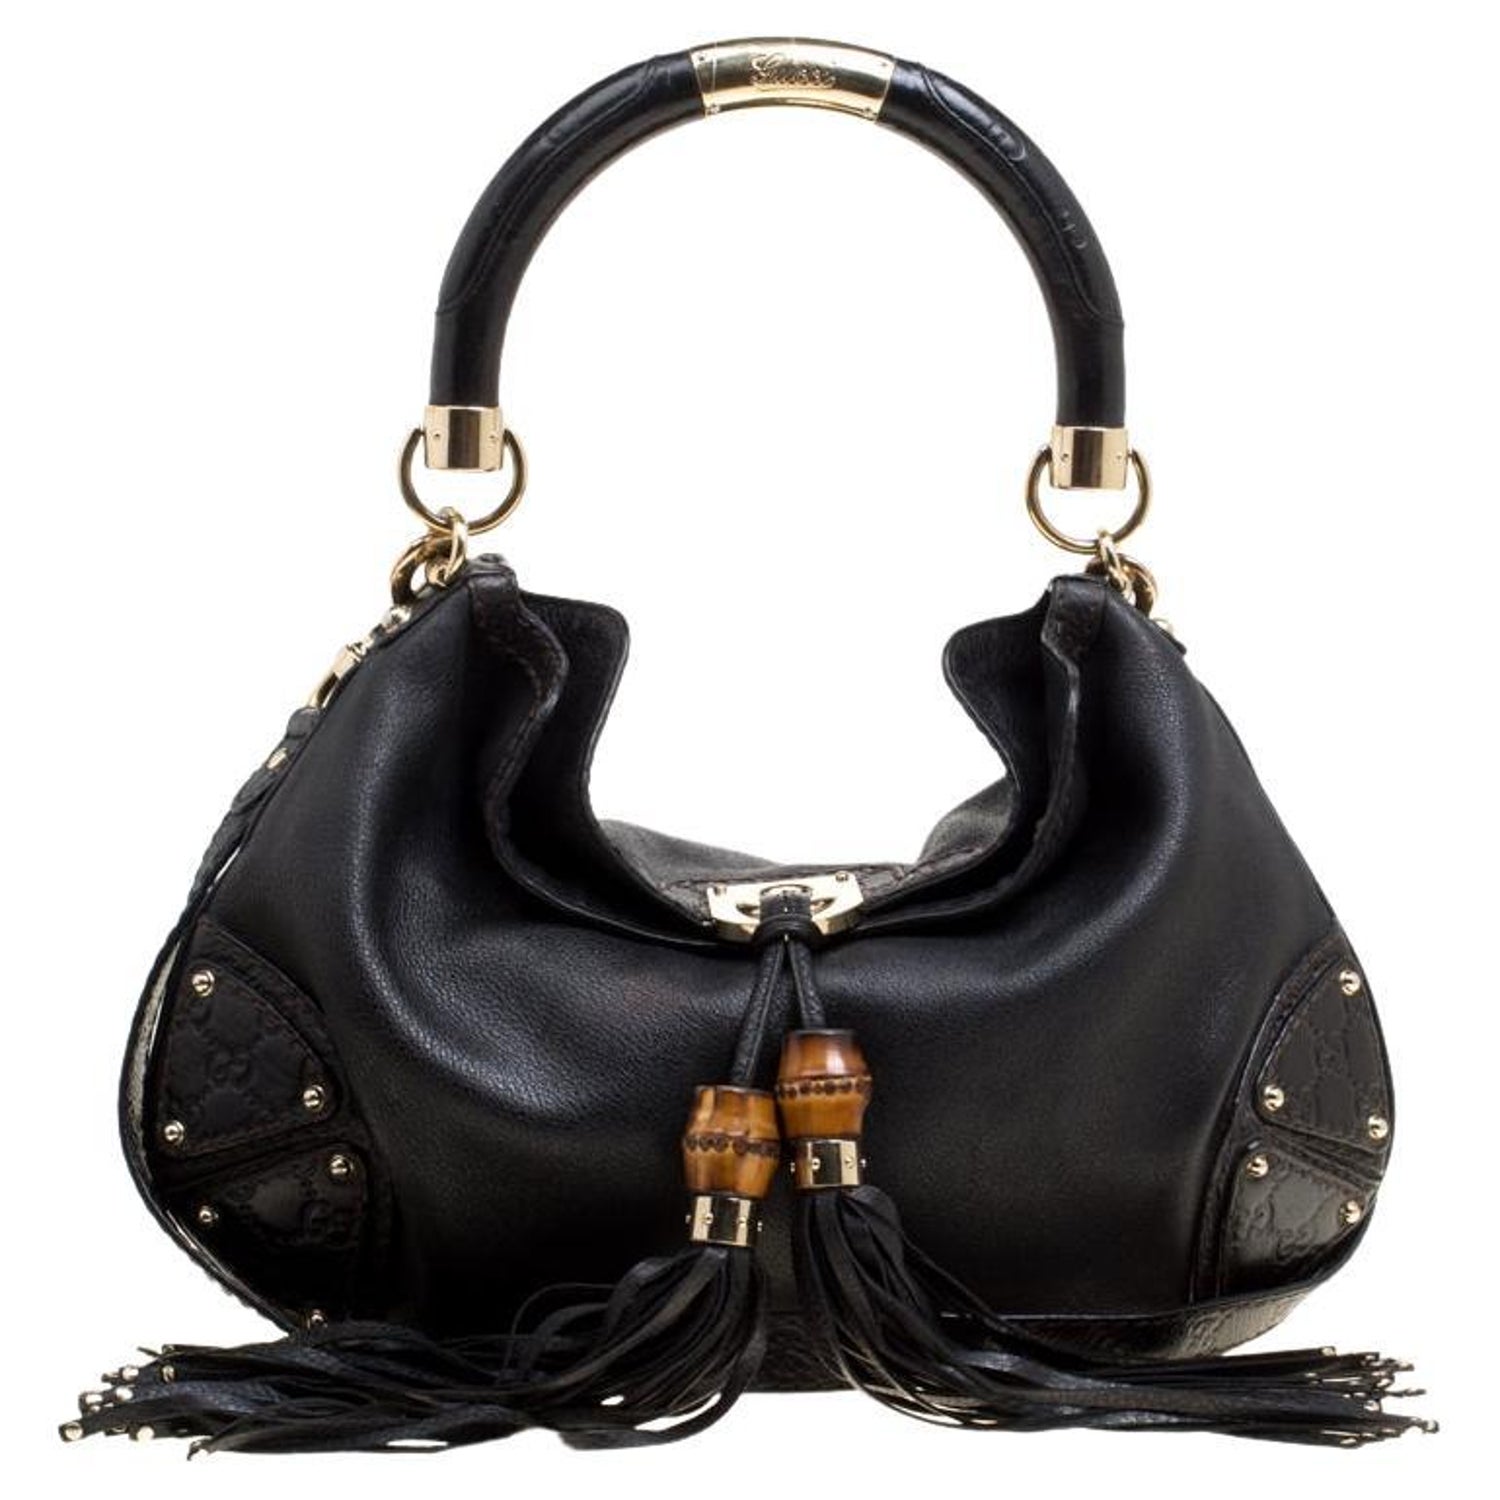 Gucci Indy Bag - 7 For Sale on 1stDibs | gucci indy hobo bag, gucci indy bag  price, gucci indy tassel hobo bag